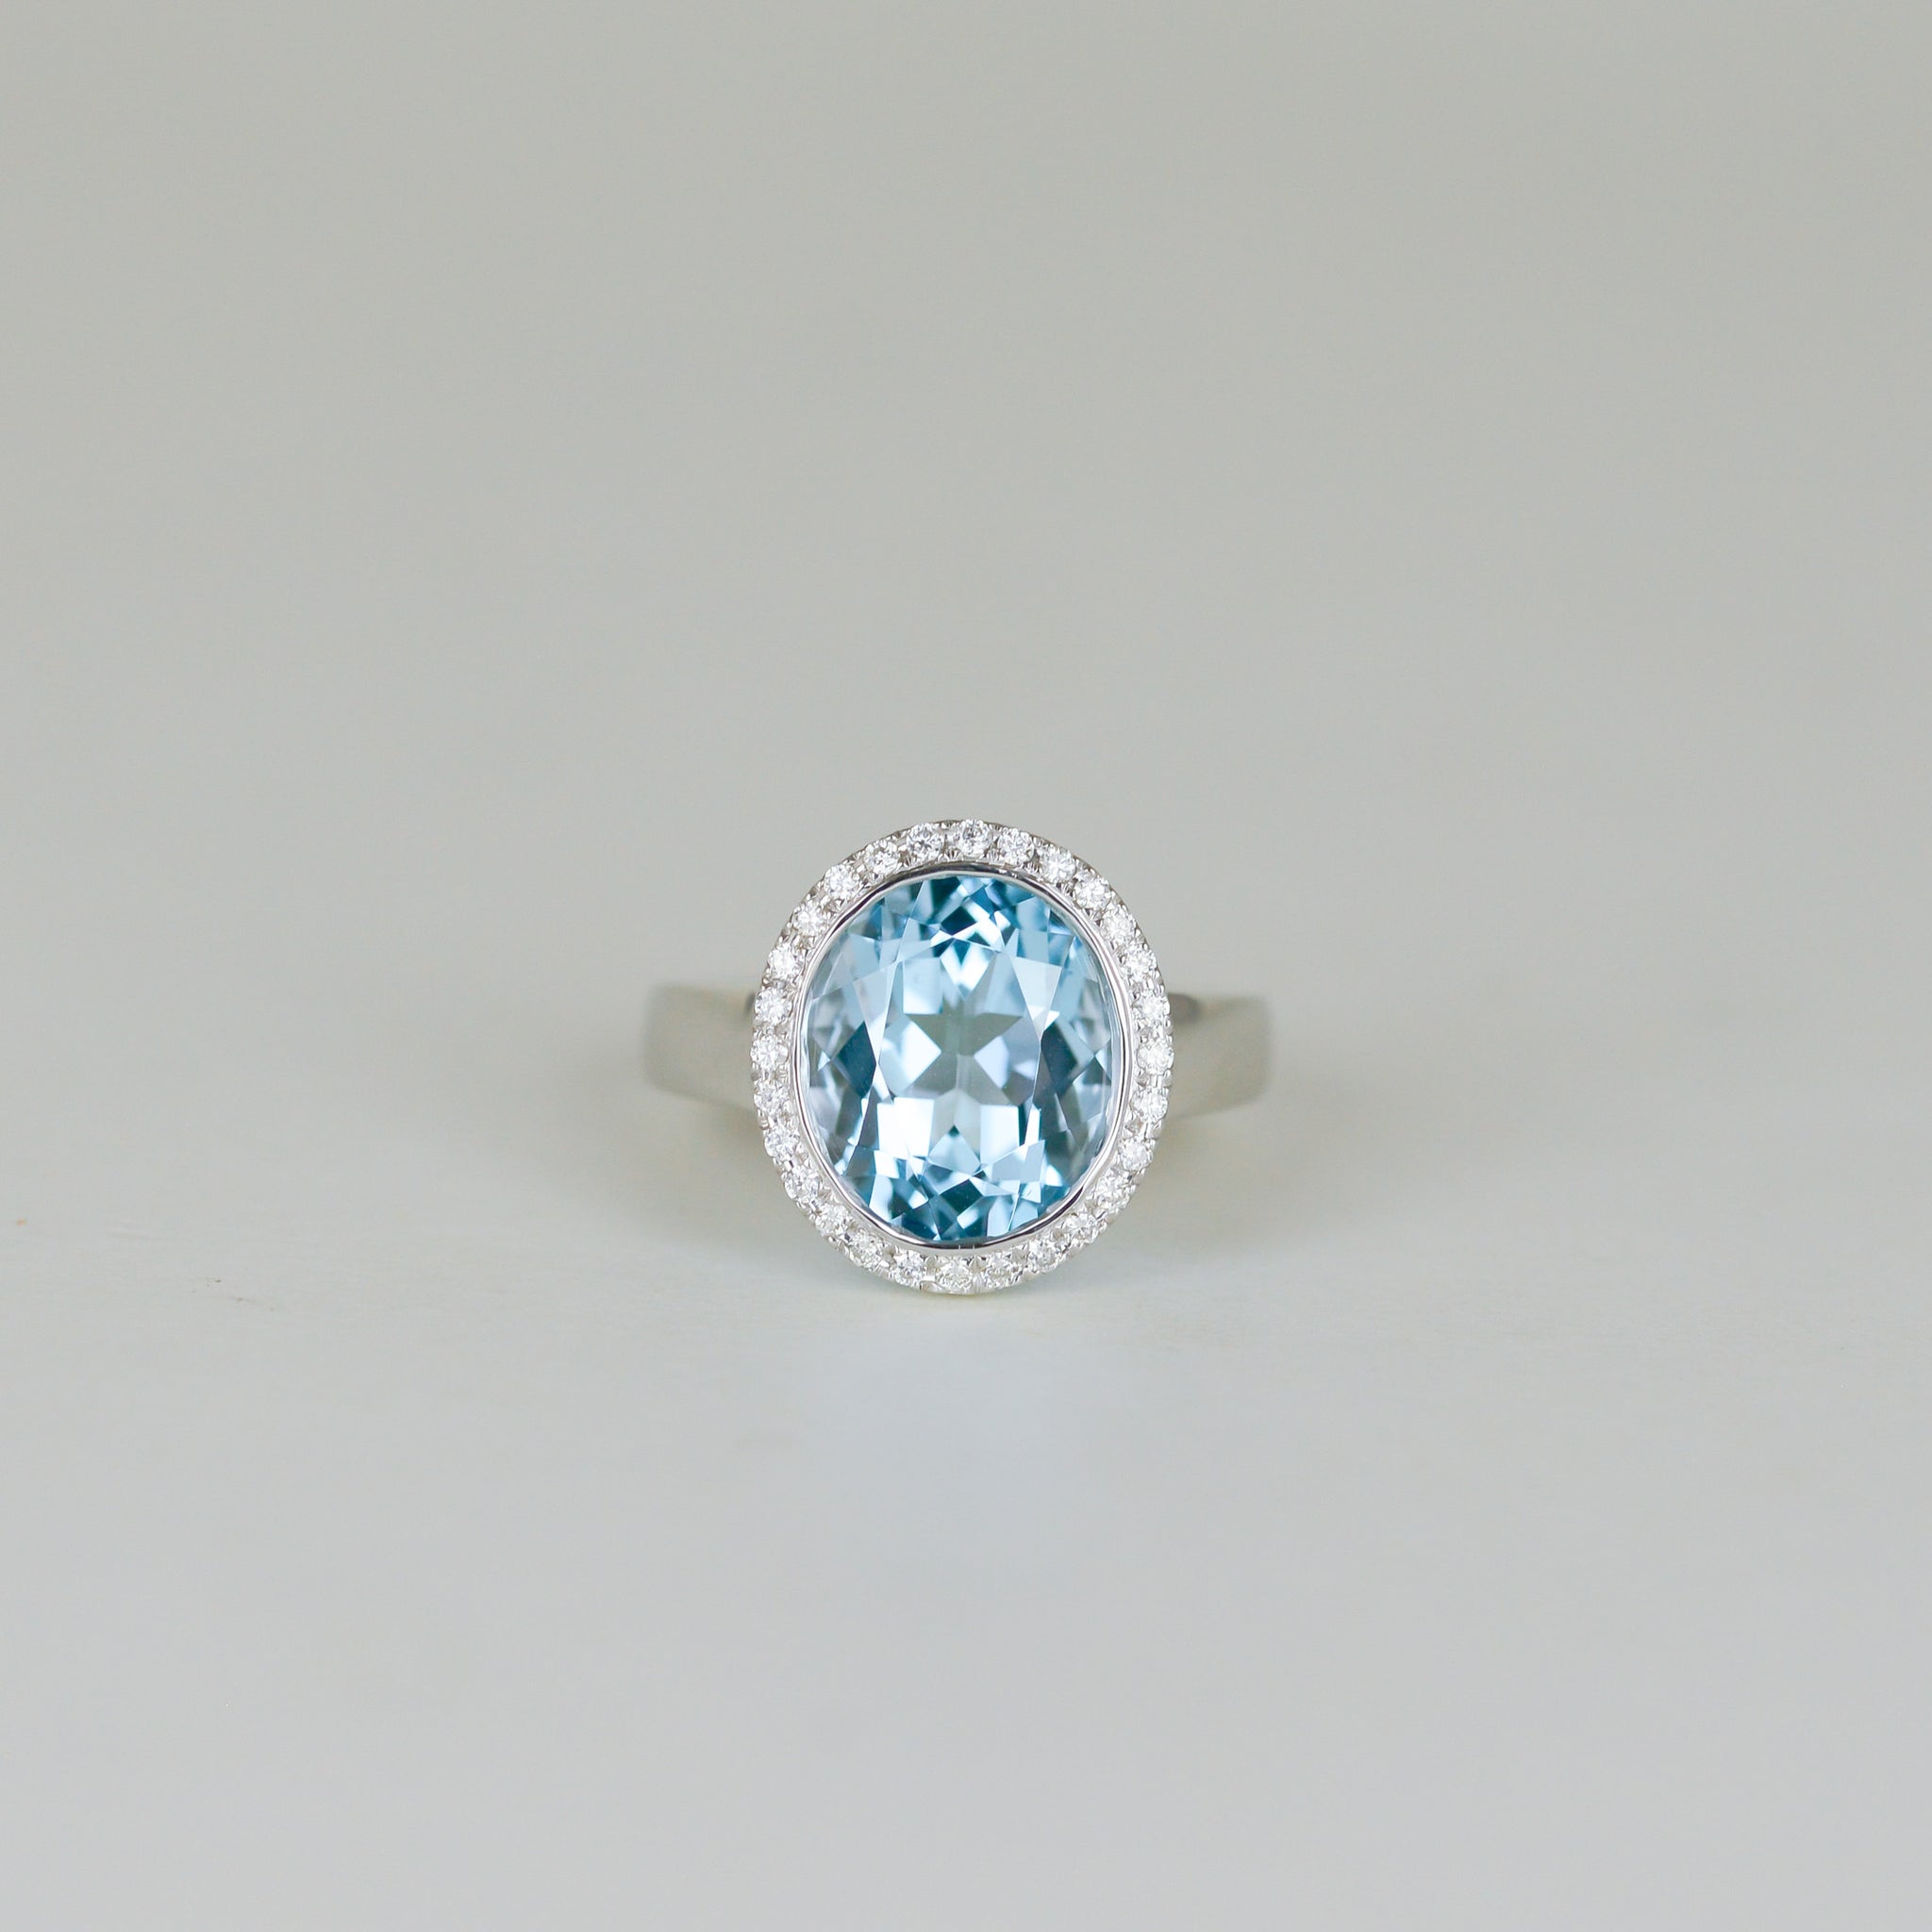 9ct White Gold 6.49ct Oval Blue Topaz and Diamond Dress Ring